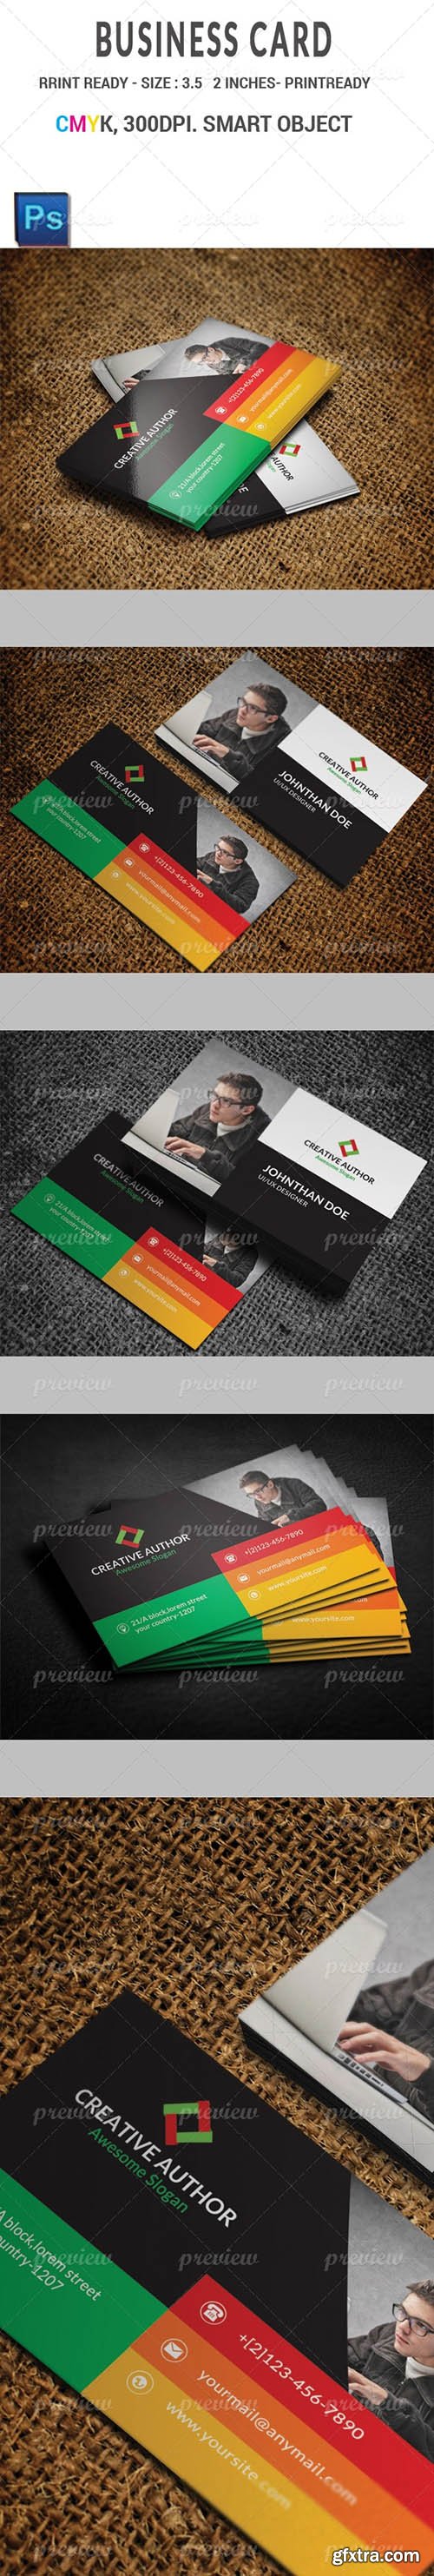 CodeGrape Agency Corporate Business Card 4730